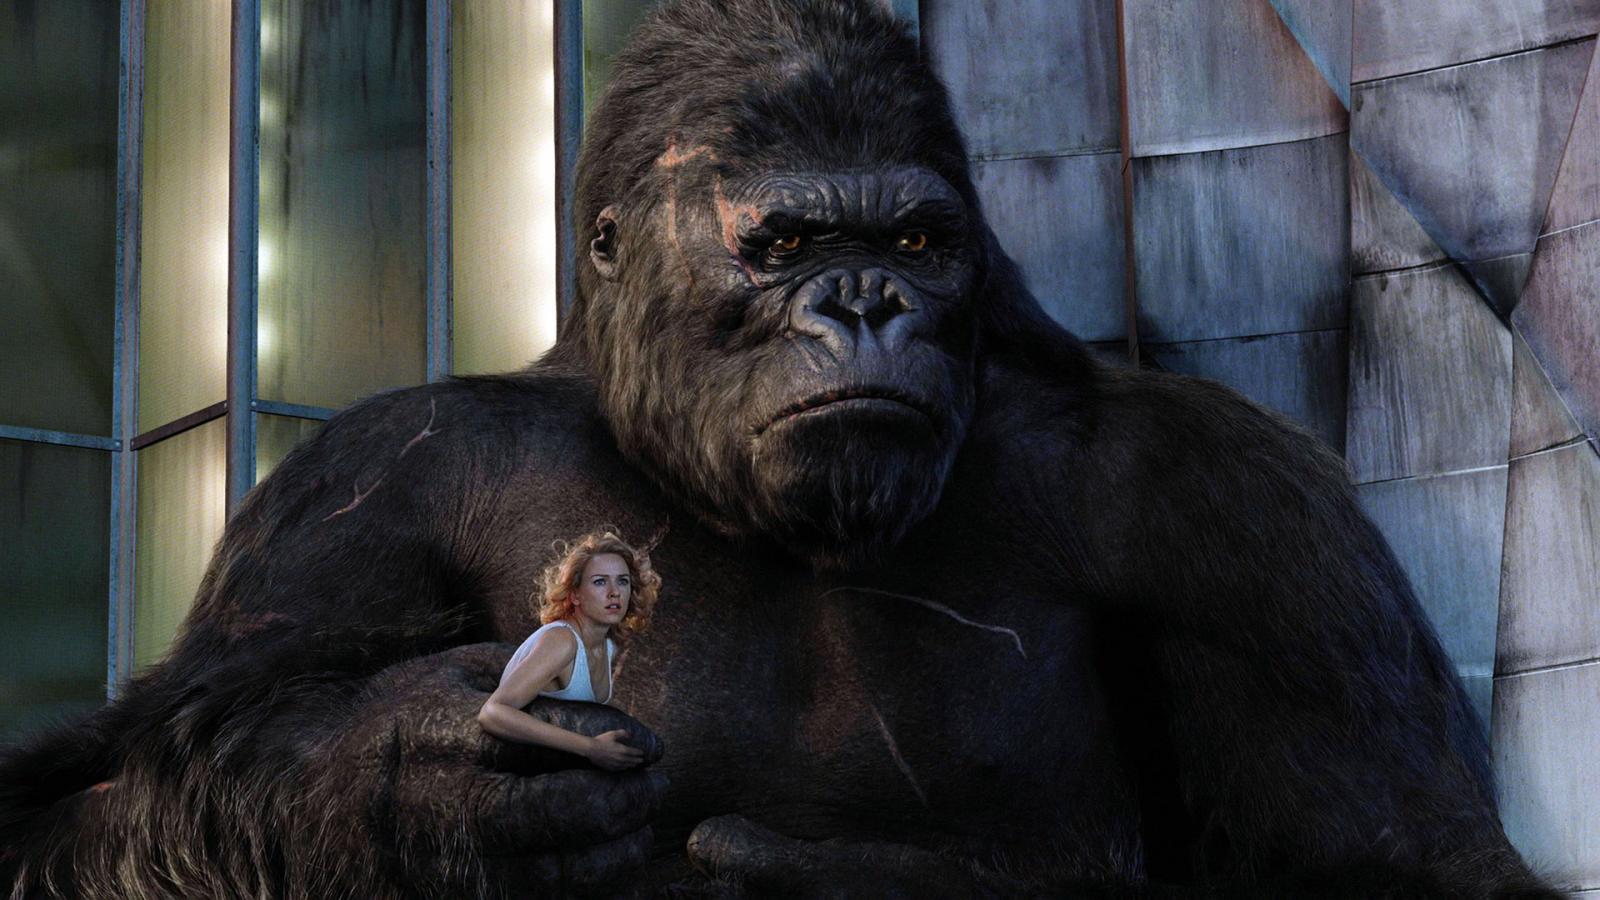 10 Most Expensive CGI Characters in Live-Action Movies That Cost a Fortune to Create - image 4